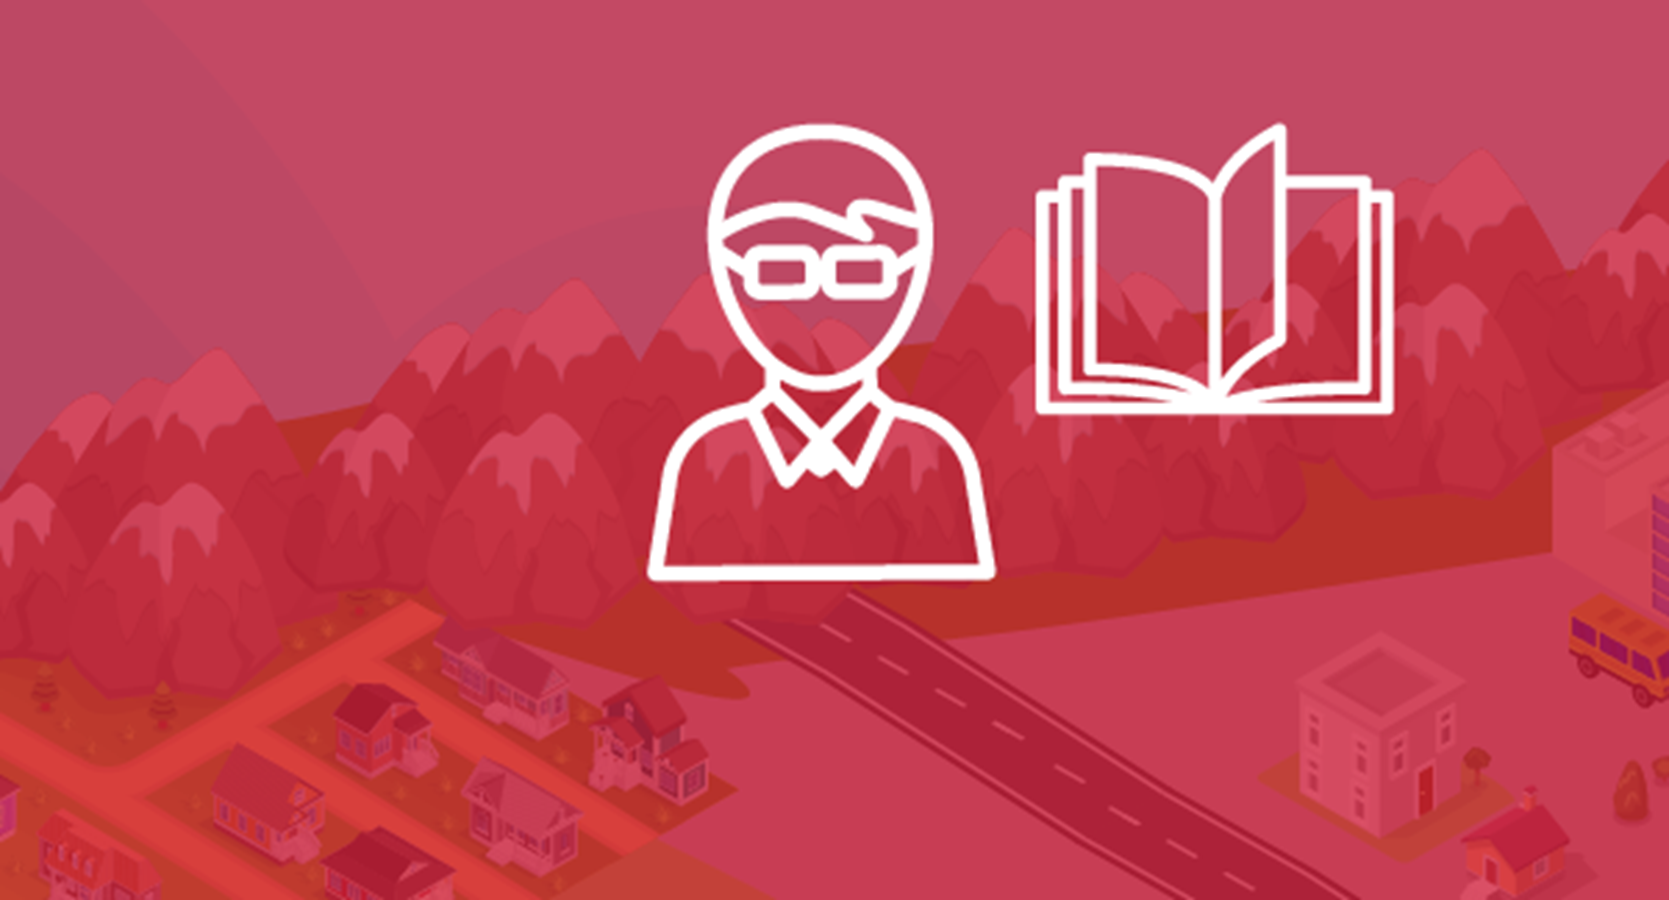 Teacher and book icon with map background and red overlay representing Supportive Teachers